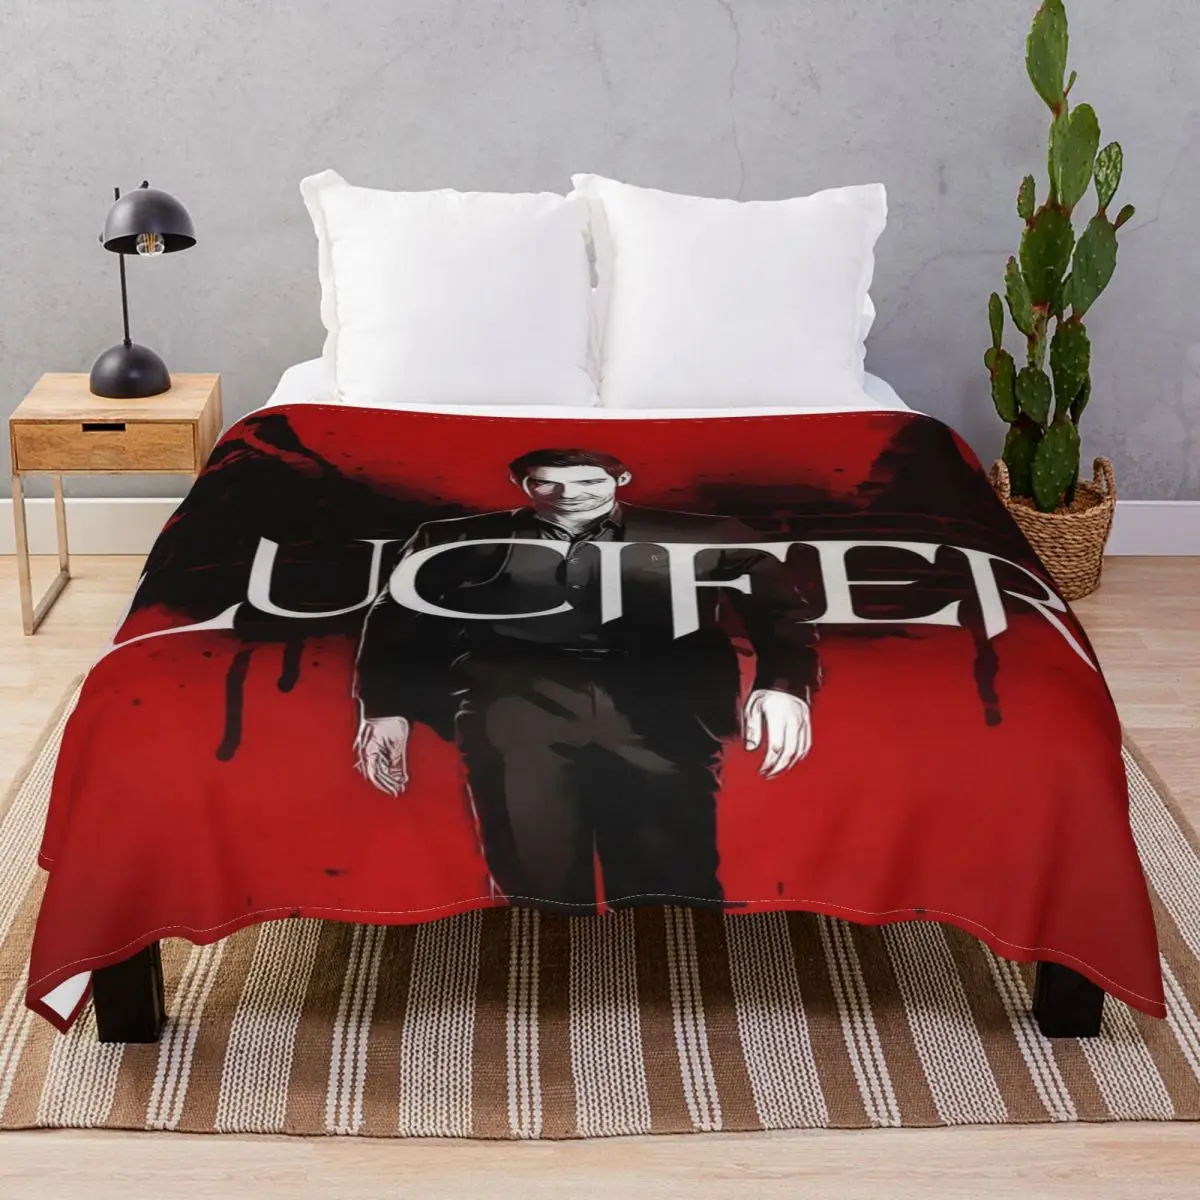 Lucifer Blankets Fleece Decoration Portable Unisex Throw Blanket for Bed Home Couch Travel Cinema